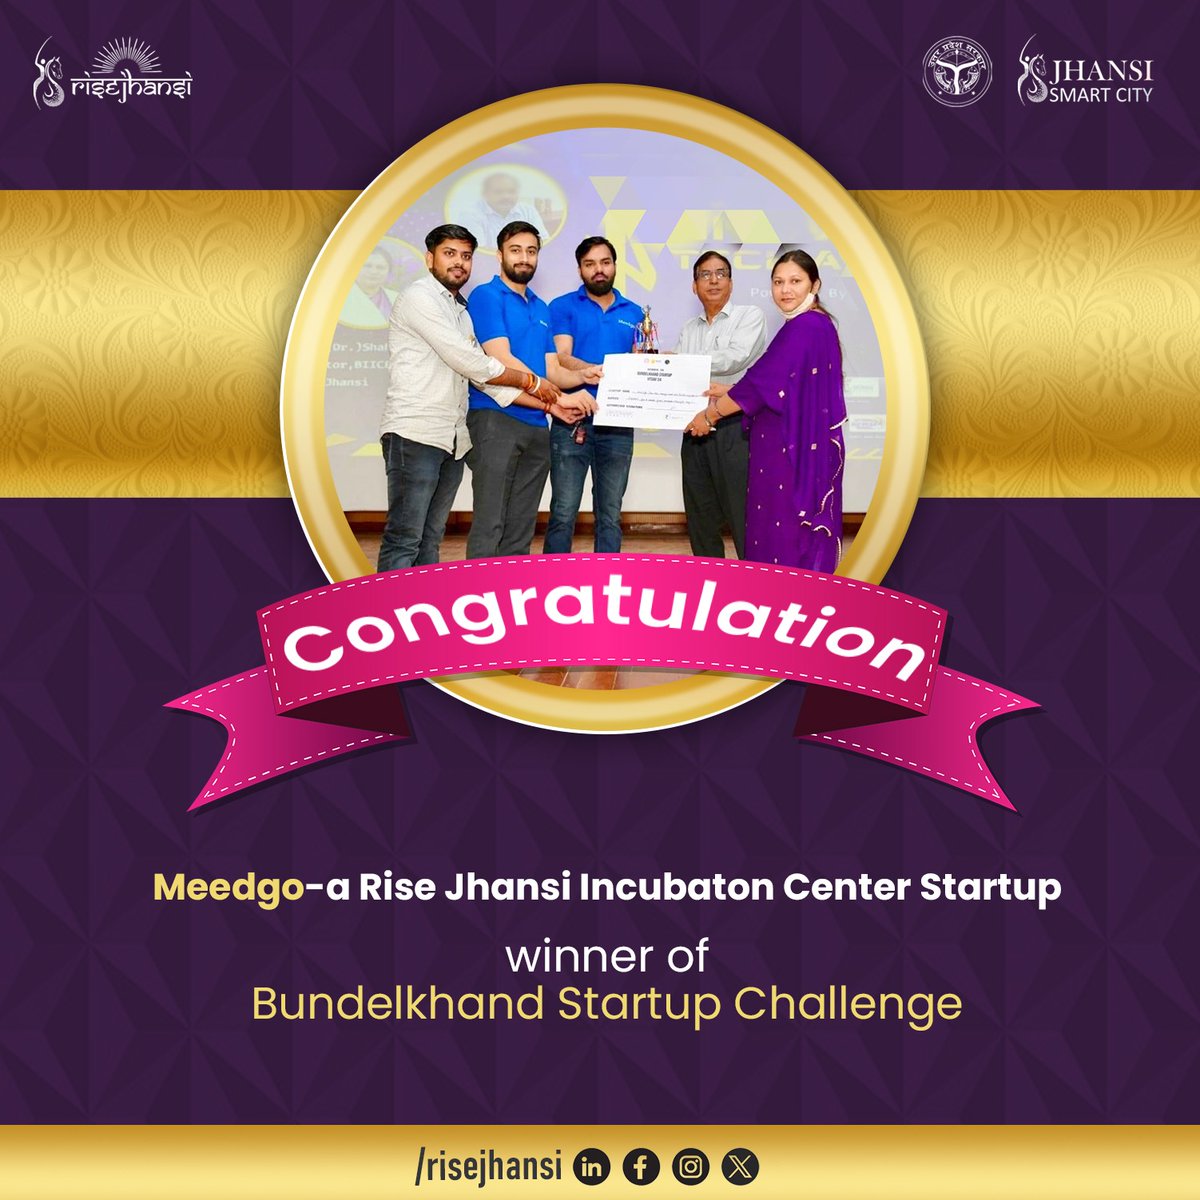 🎉 Congratulations to Meedgo! Winner of the Bundelkhand Startup Challenge from our #JhansiIncubation Center.  Let's celebrate their success! 

#RISEJhansi #StartupIndia #Im #Rise #Incubationmasters #Jhansismartcity